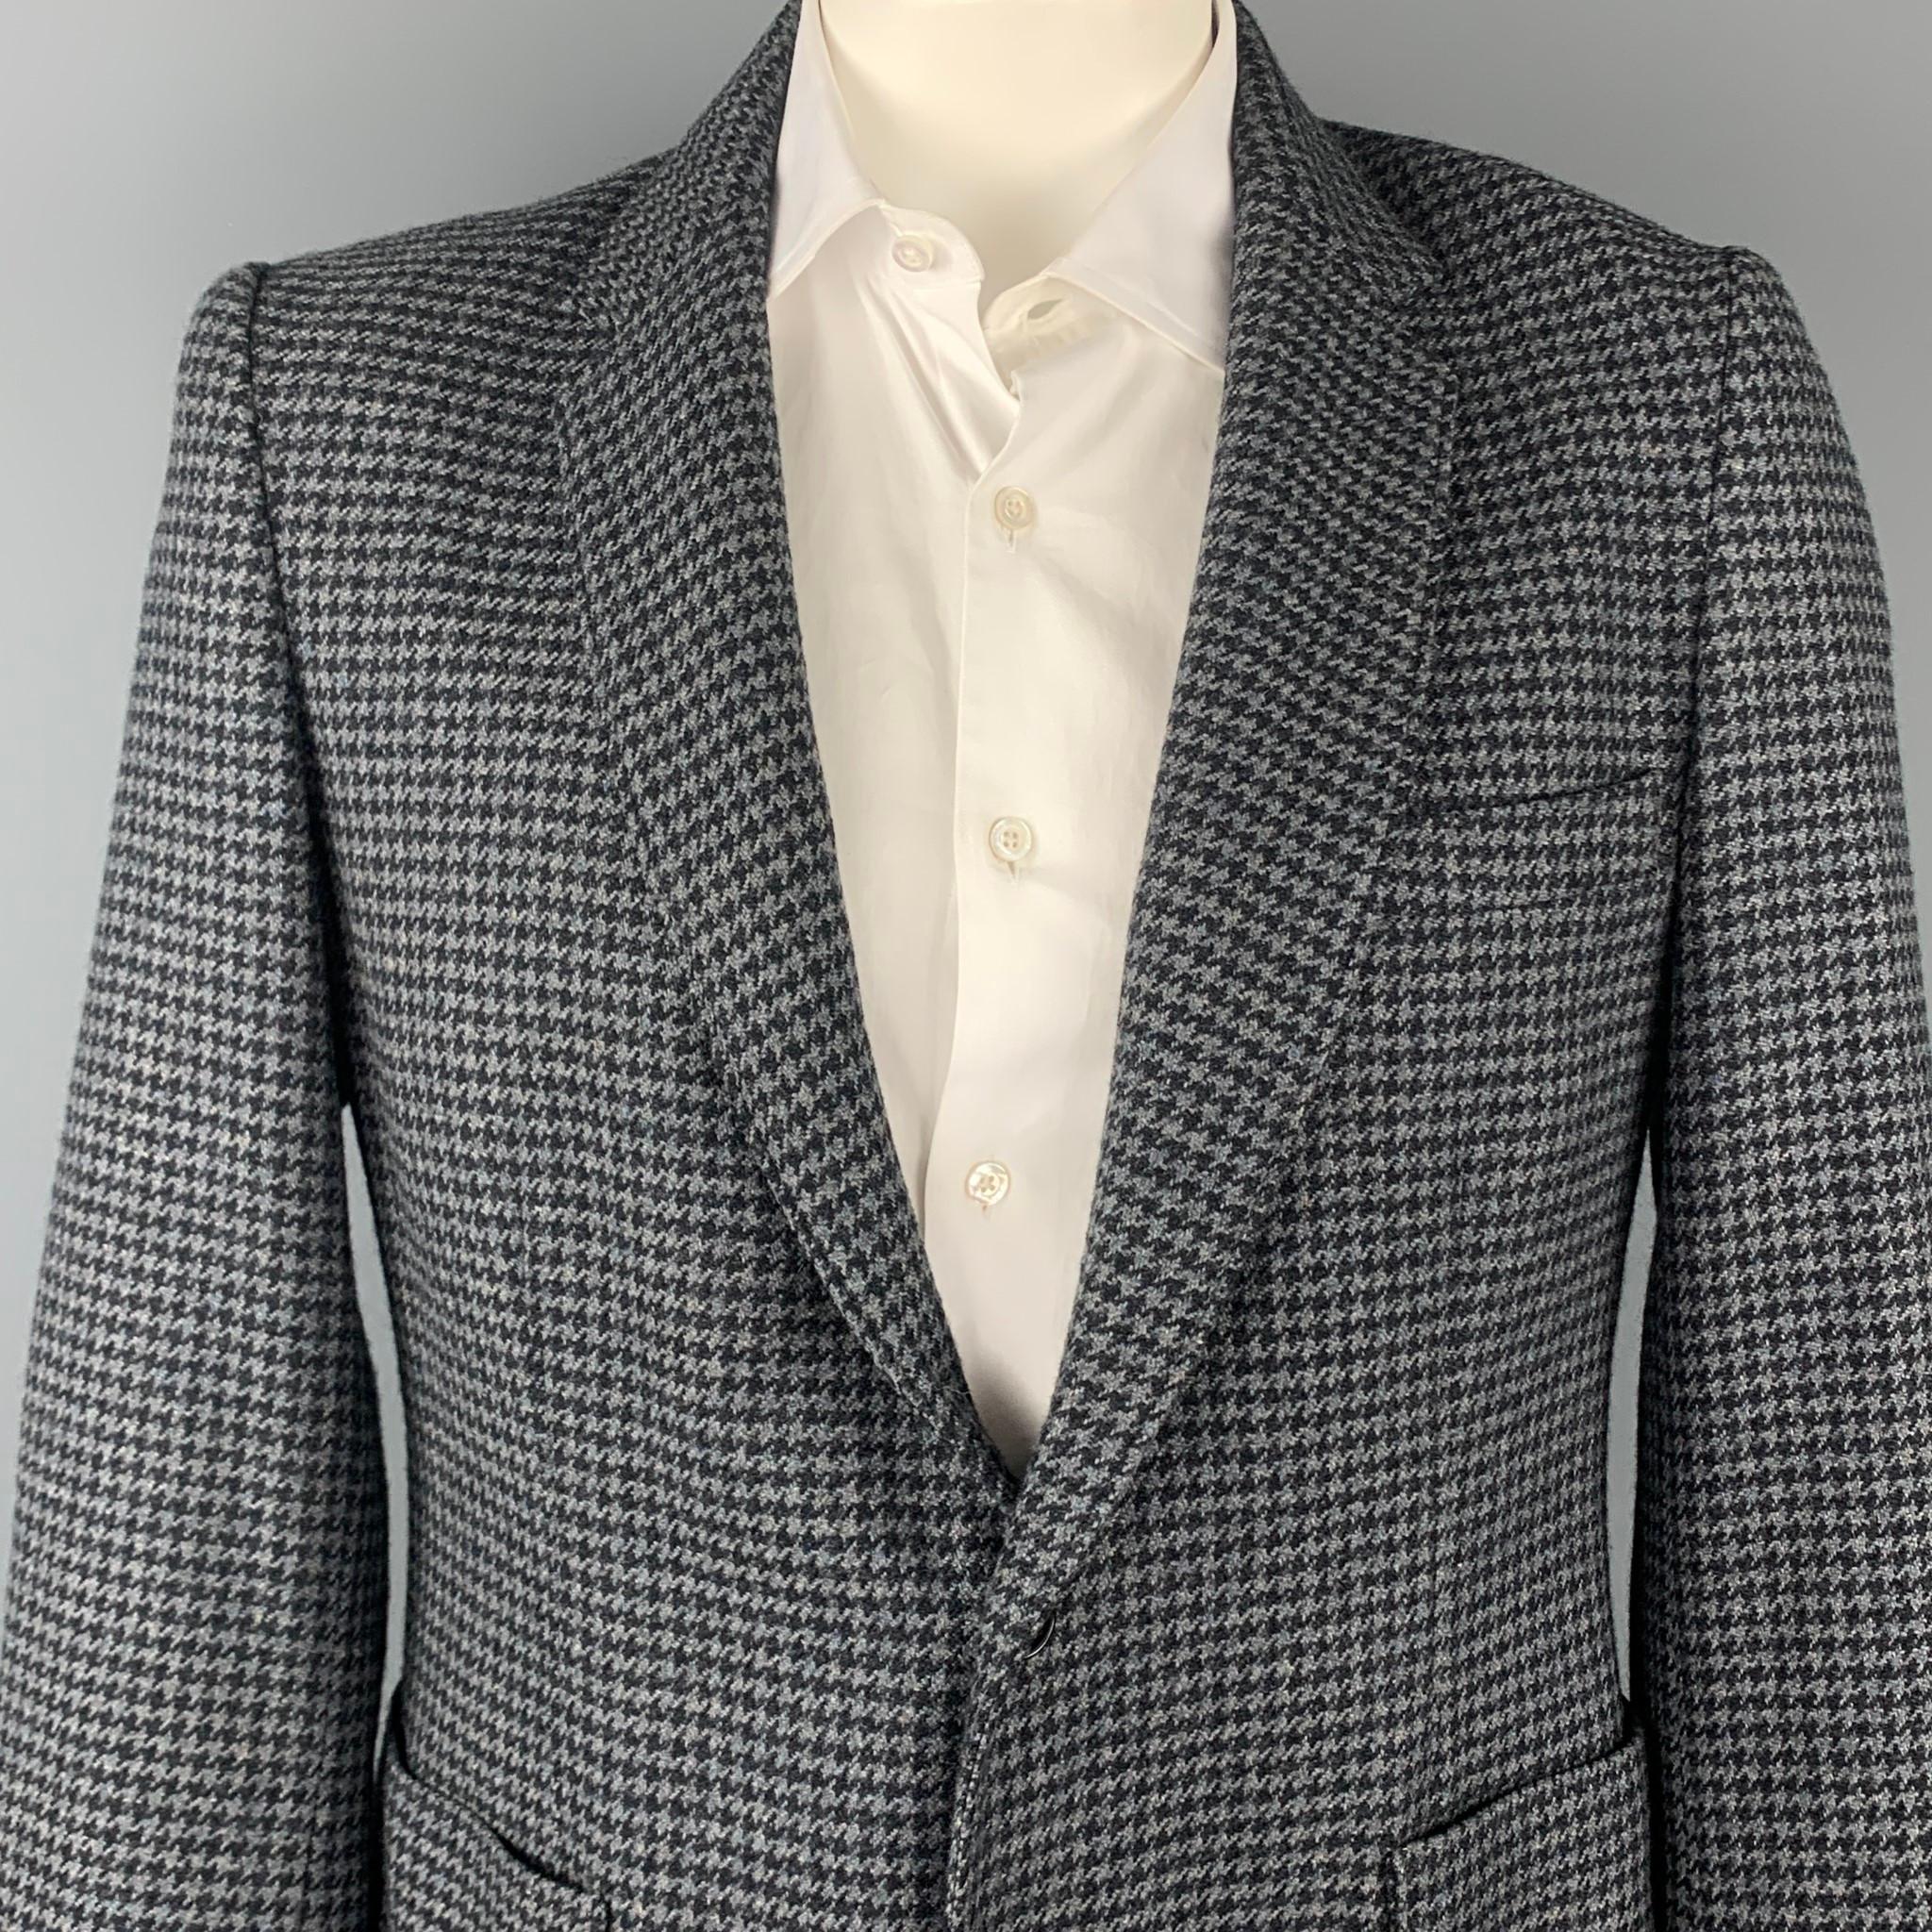 DUCKIE BROWN sport coat comes in a gray & black houndstooth wool blend with a full liner featuring a notch lapel, patch pockets, and a two button closure. Made in USA.

Good Pre-Owned Condition.
Marked: 44

Measurements:

Shoulder: 18.5 in.
Chest: